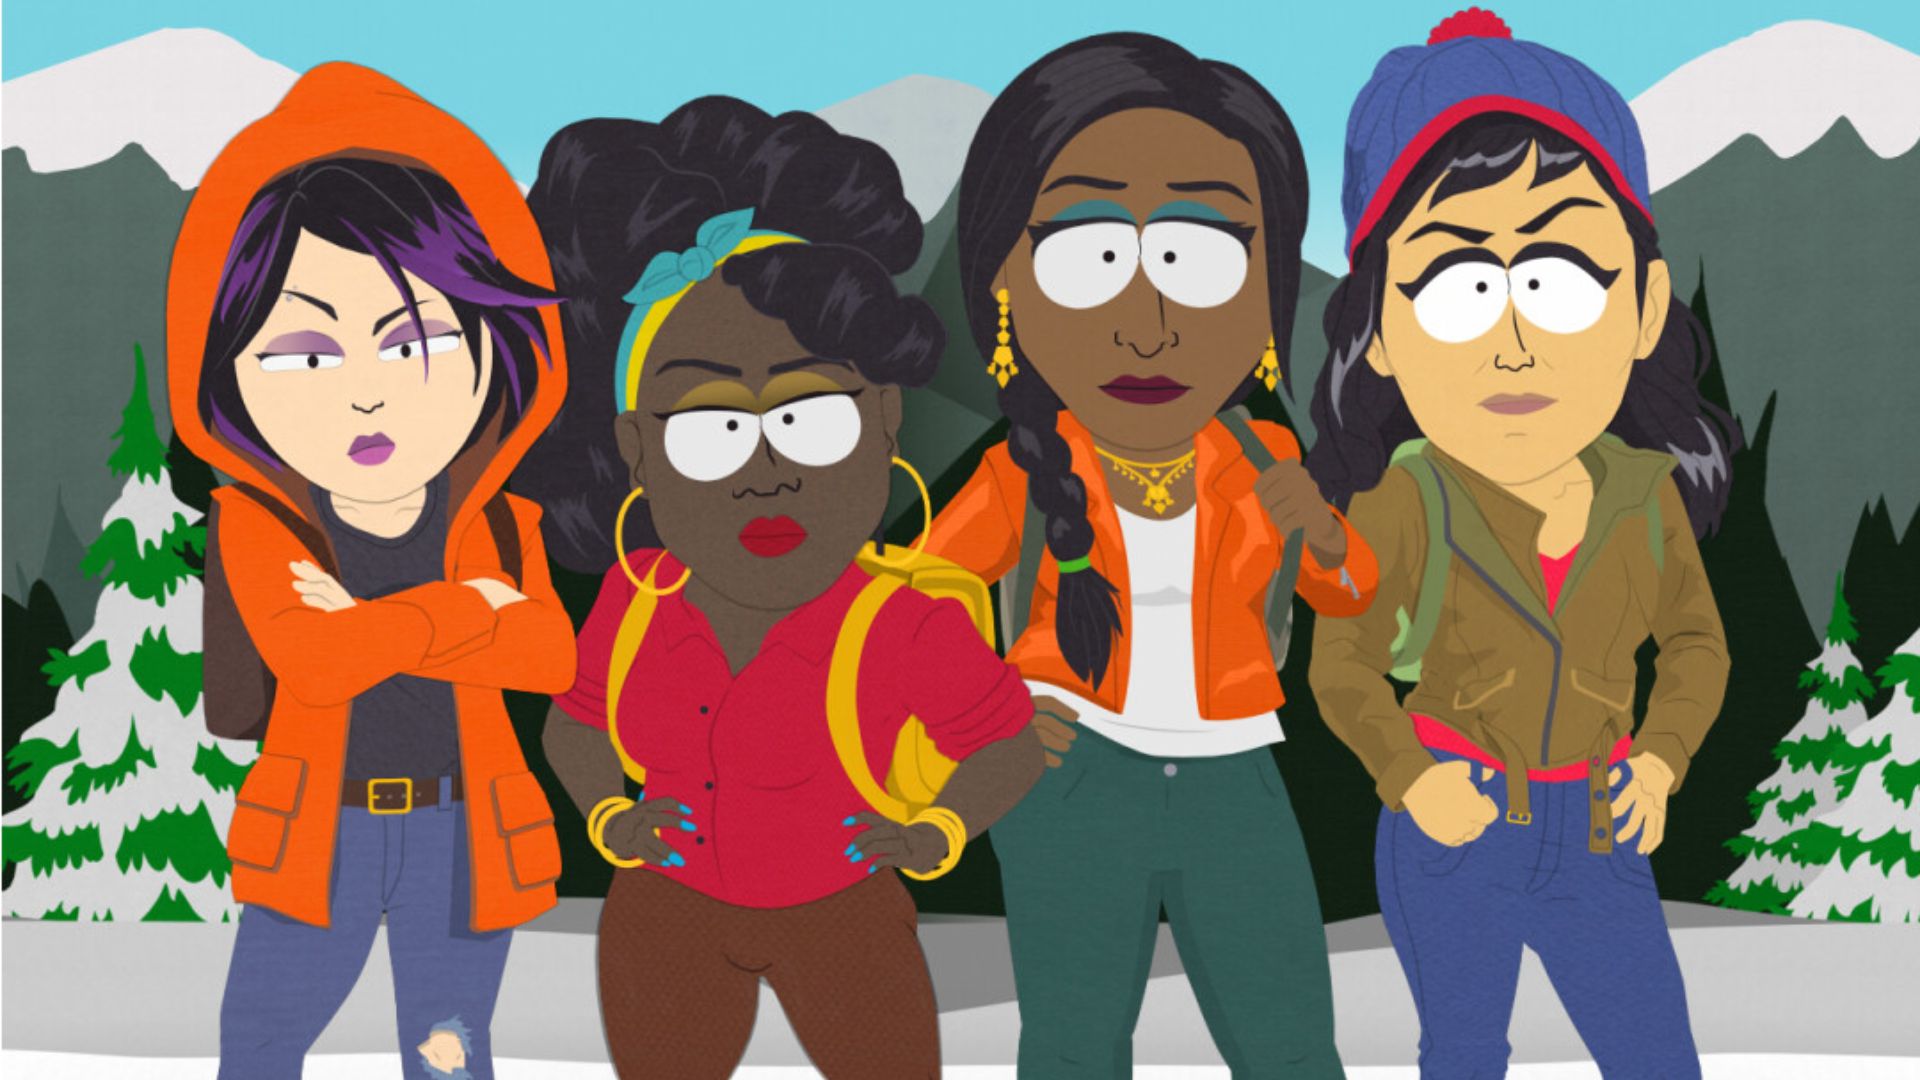 Speculations On The Release Date Of South Park Season 27